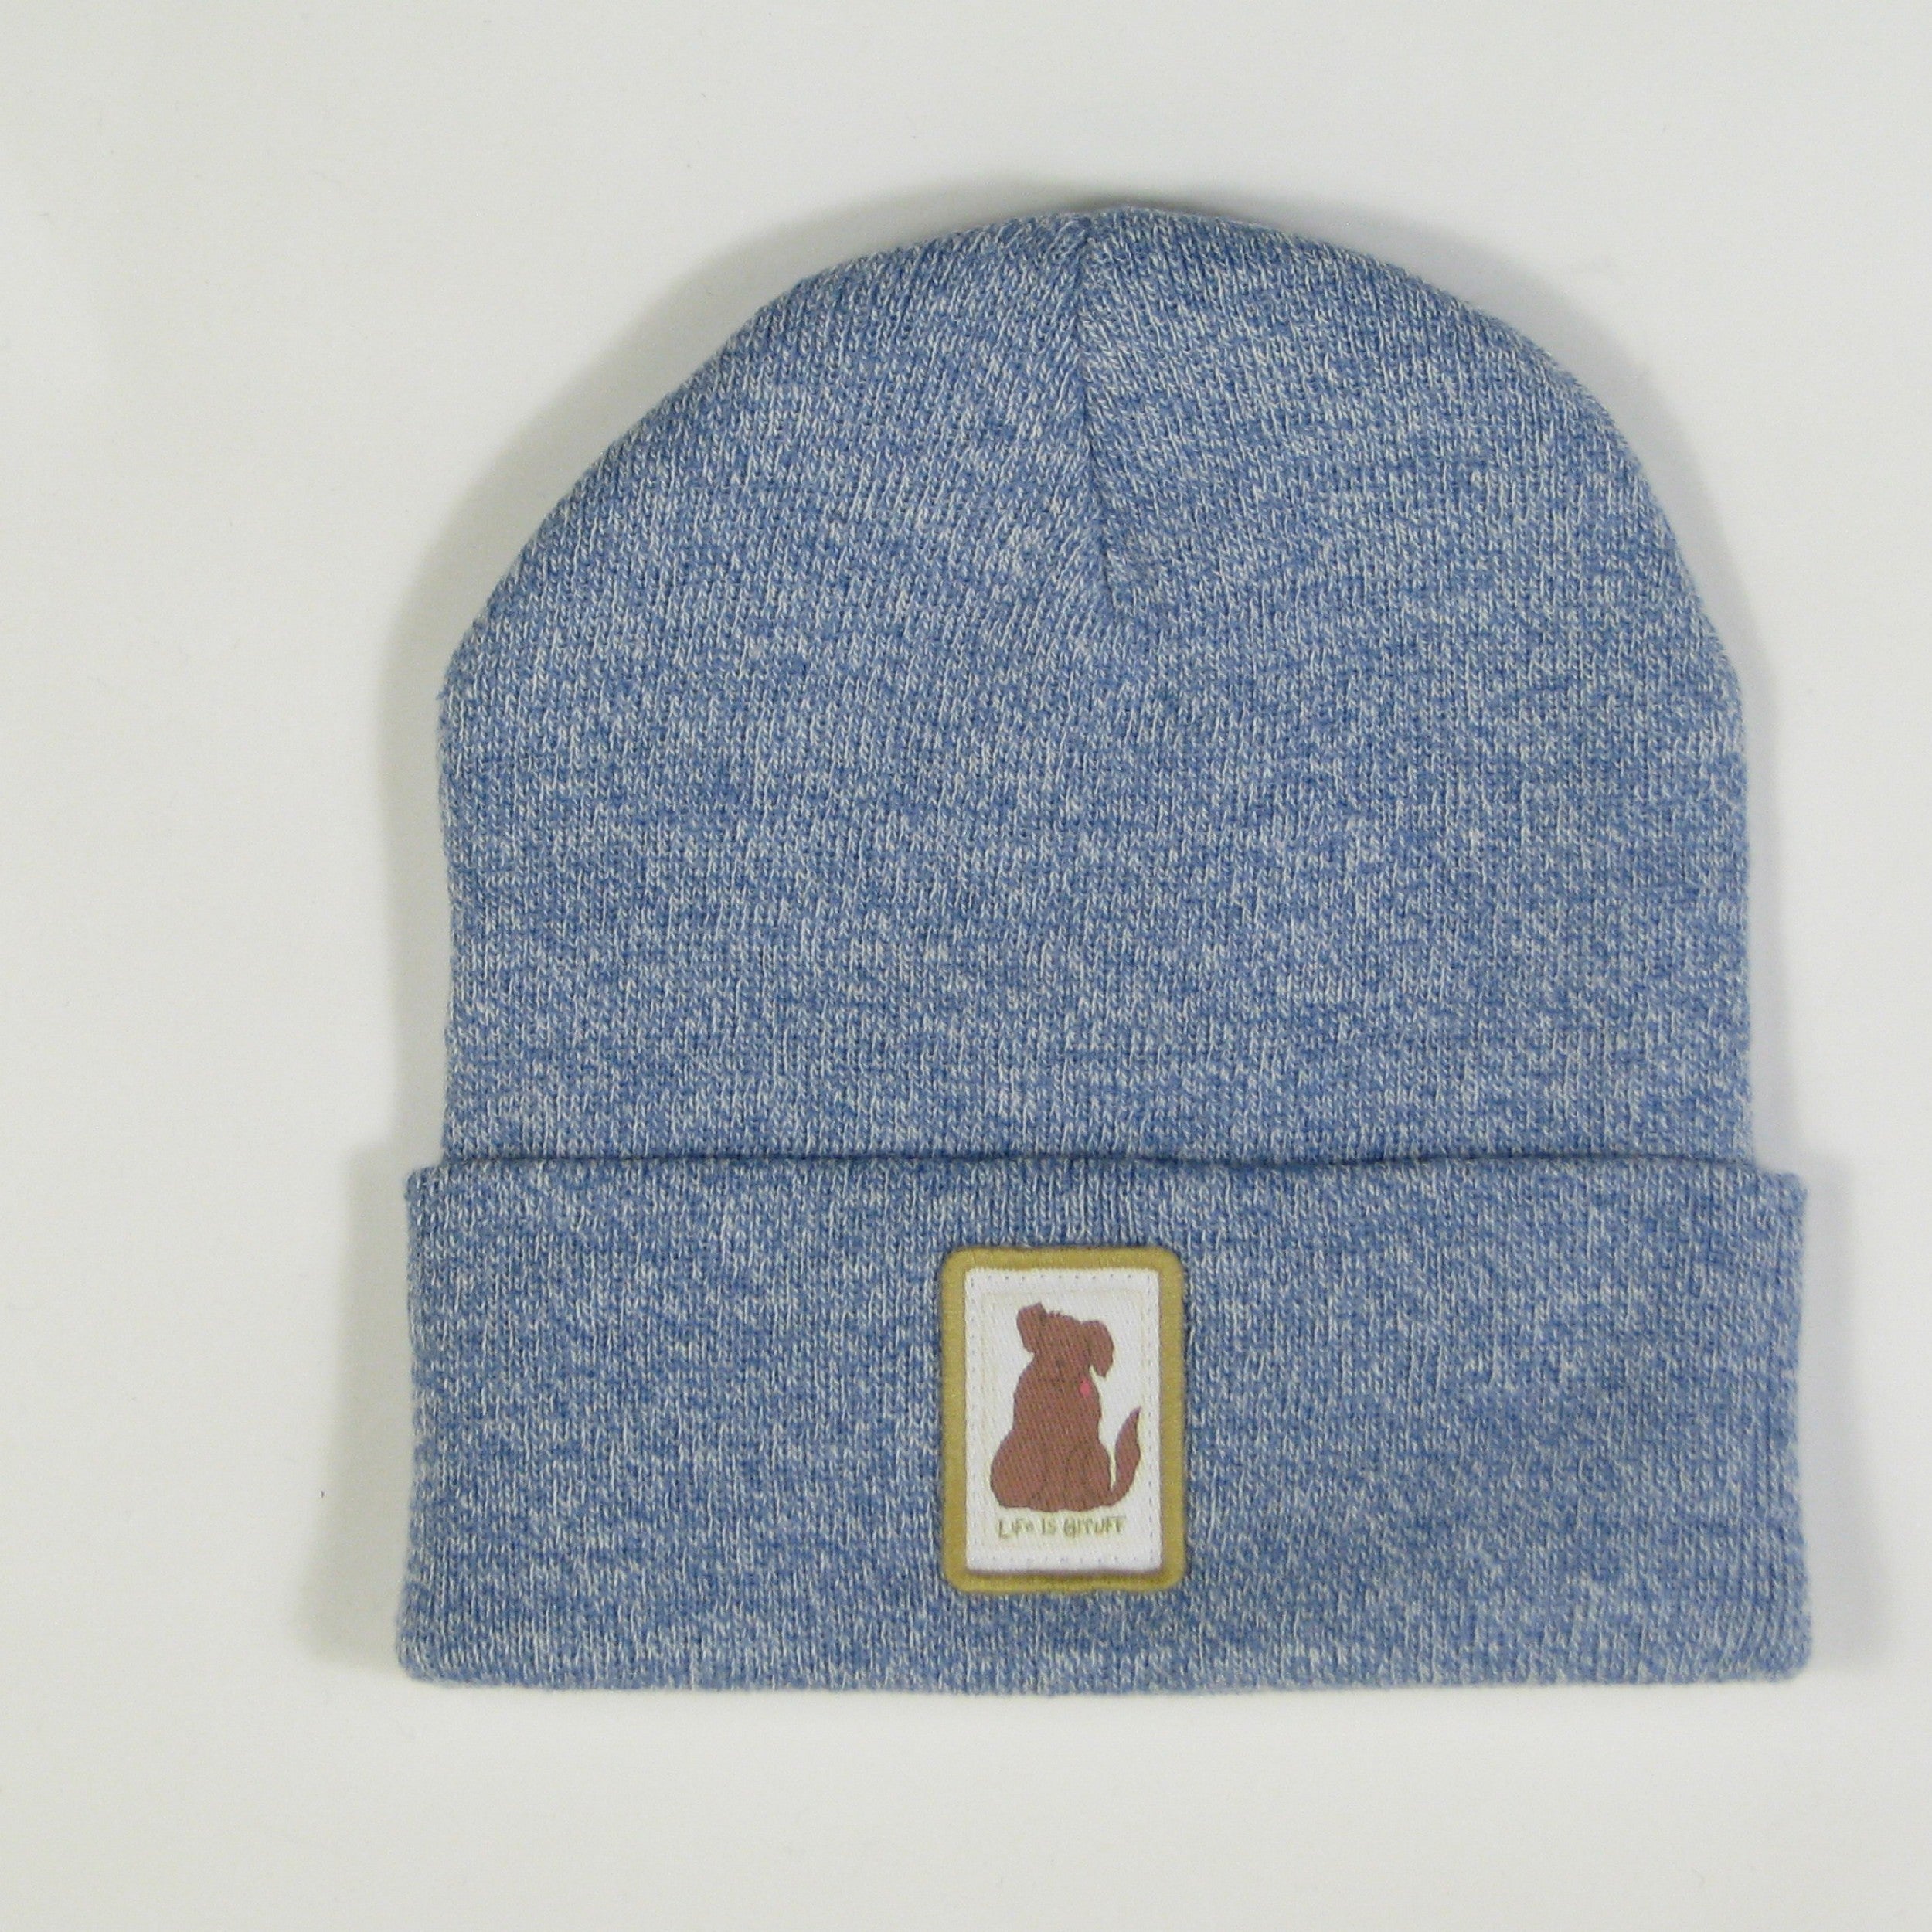 LIG Beanie Marled Cuff Dog available in 3 colors